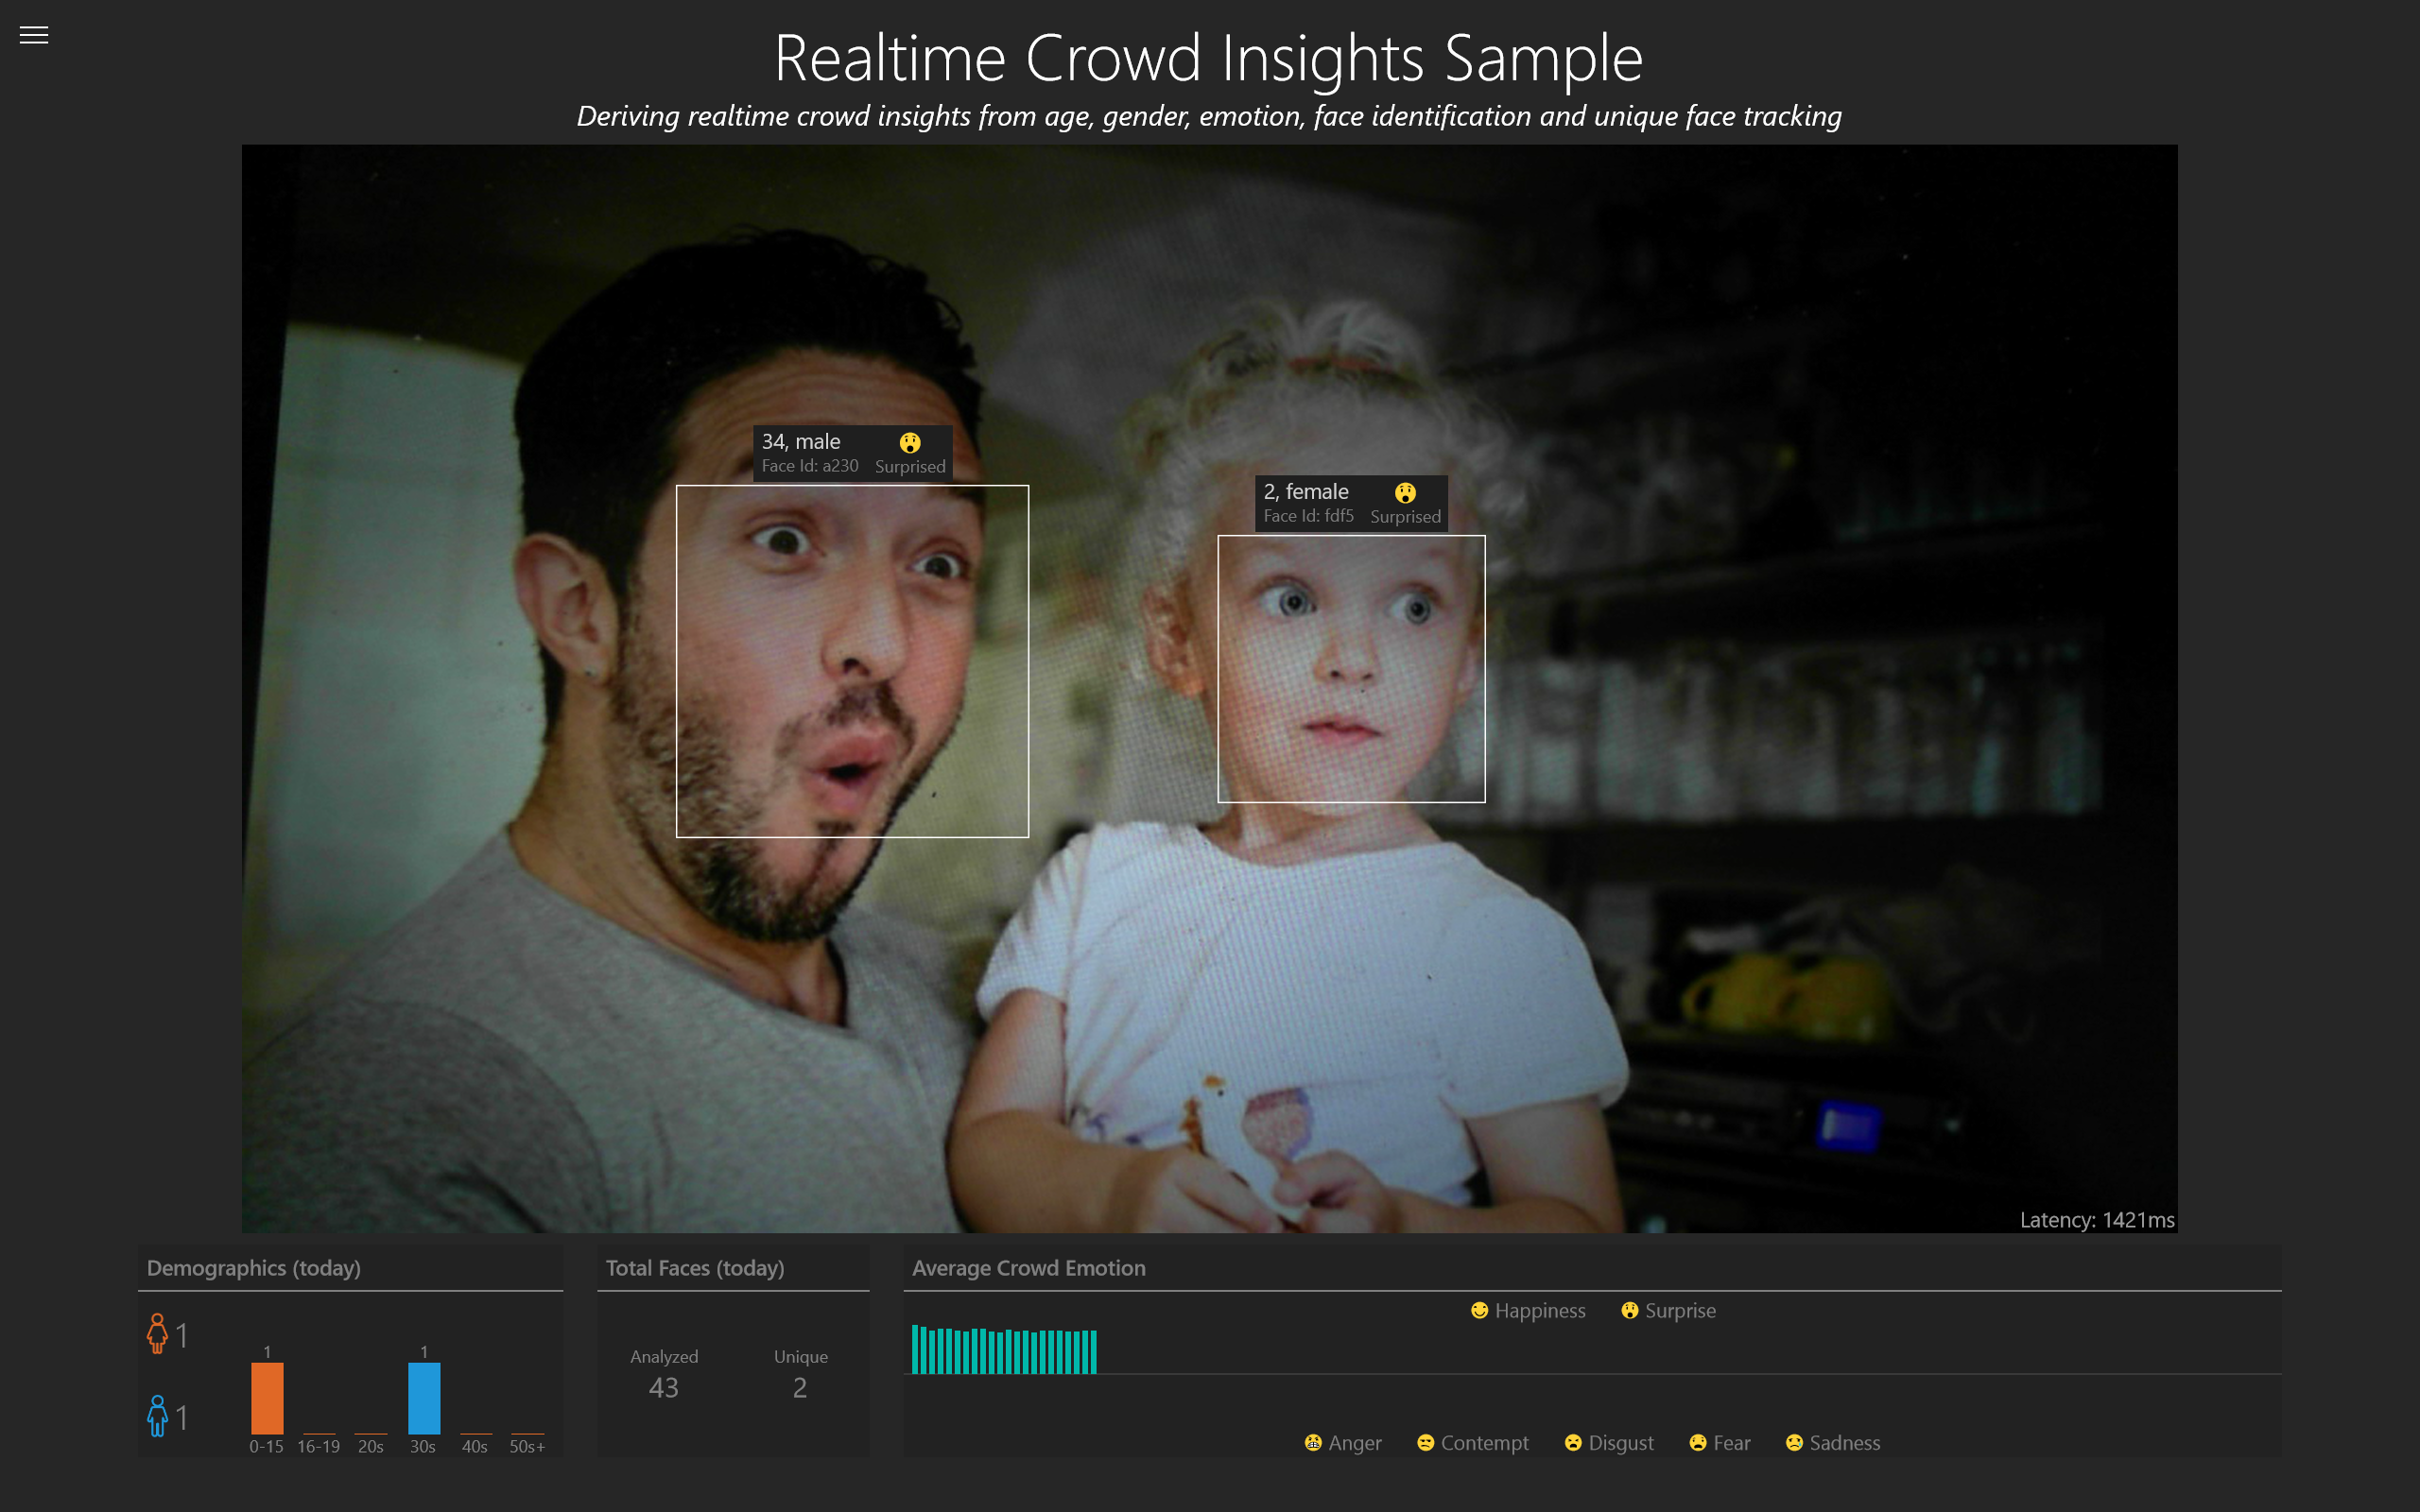 Realtime Crowd Insights on the Intelligent Kiosk app.